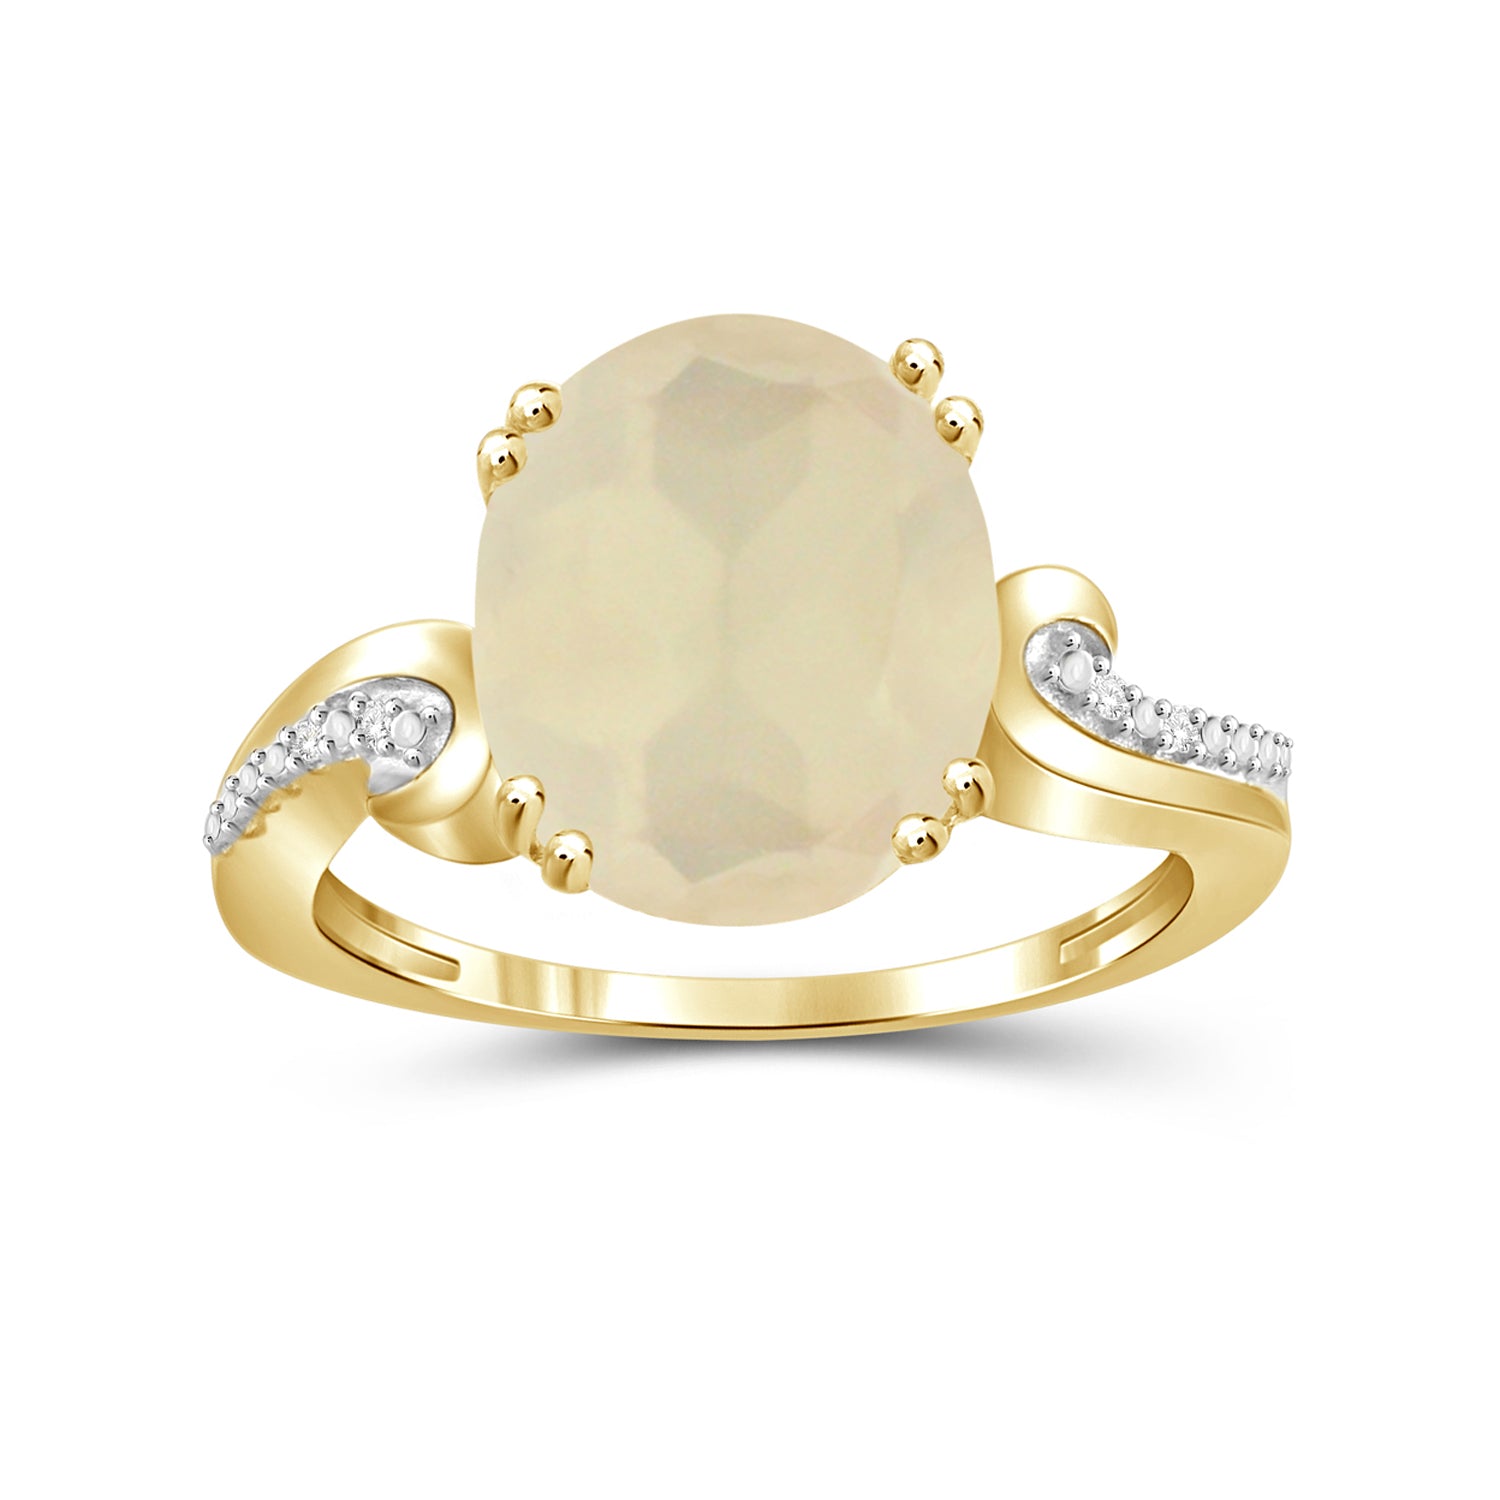 Moonstone Ring Birthstone Jewelry – 4.25 Carat Moonstone 14K Gold-Plated Ring Jewelry with White Diamond Accent – Gemstone Rings with Hypoallergenic 14K Gold-Plated Band